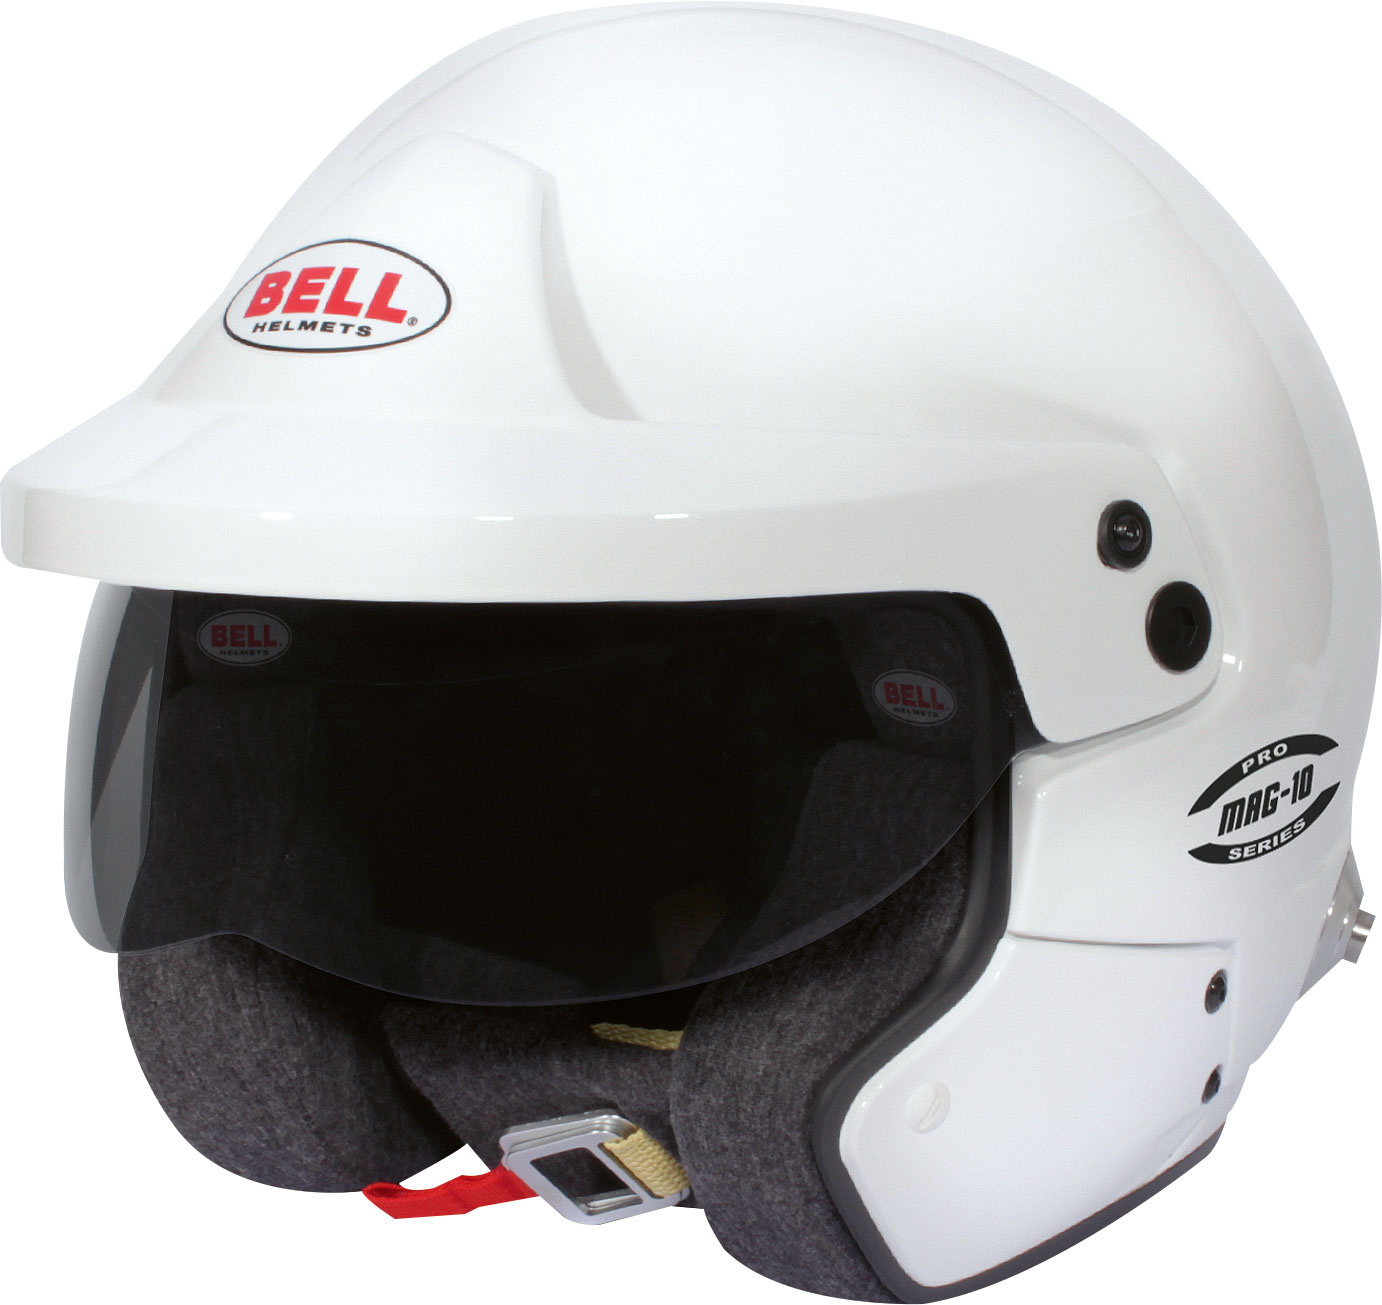 BELL Helm MAG-10 Pro